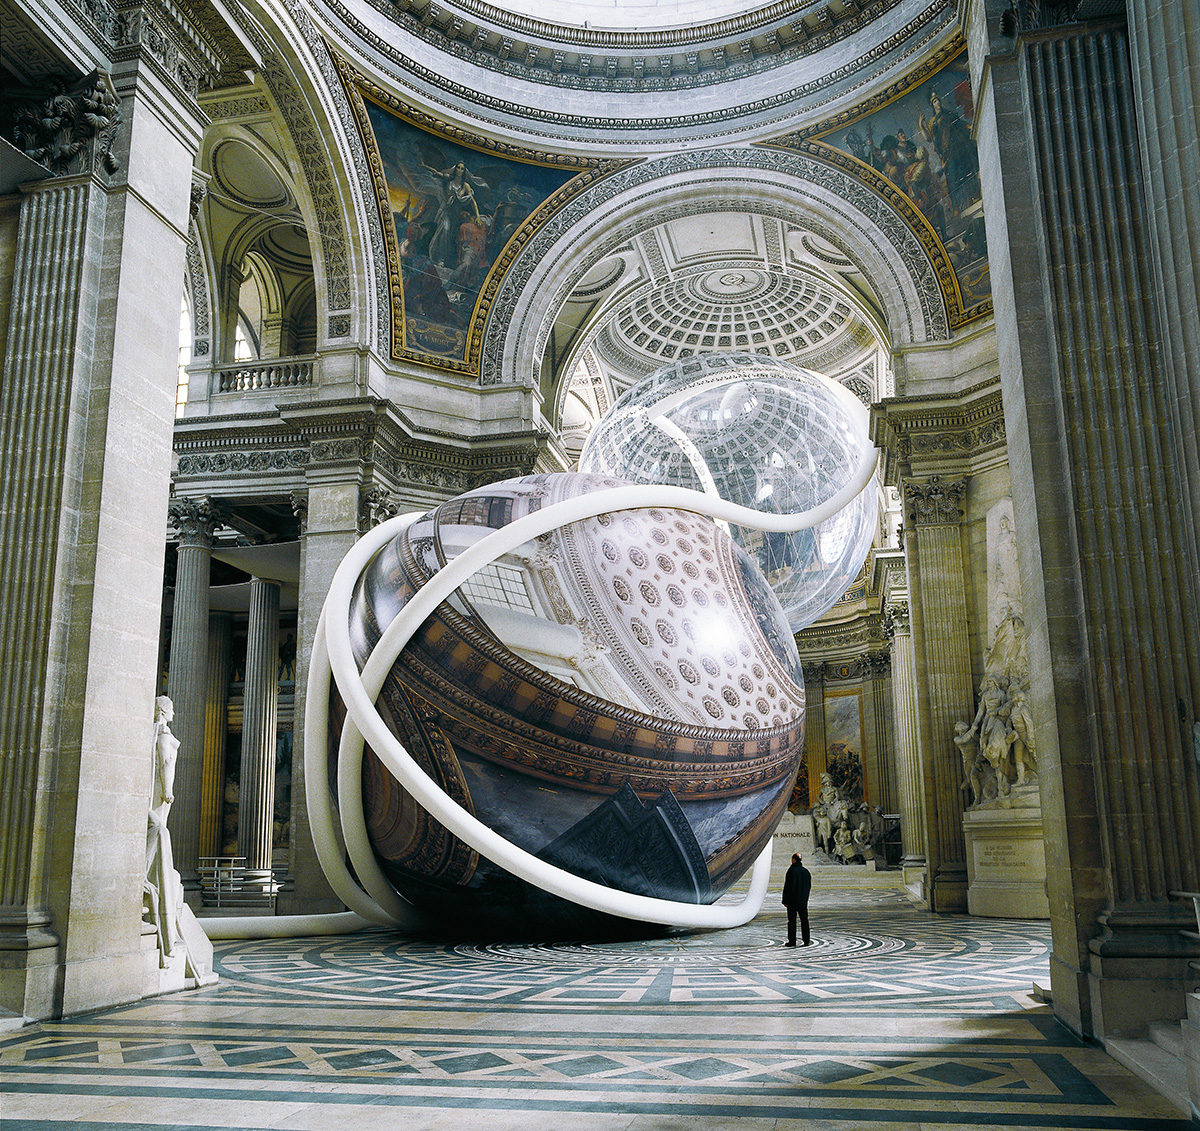 Large scale sculpture depicting a sphere inside a museum setting